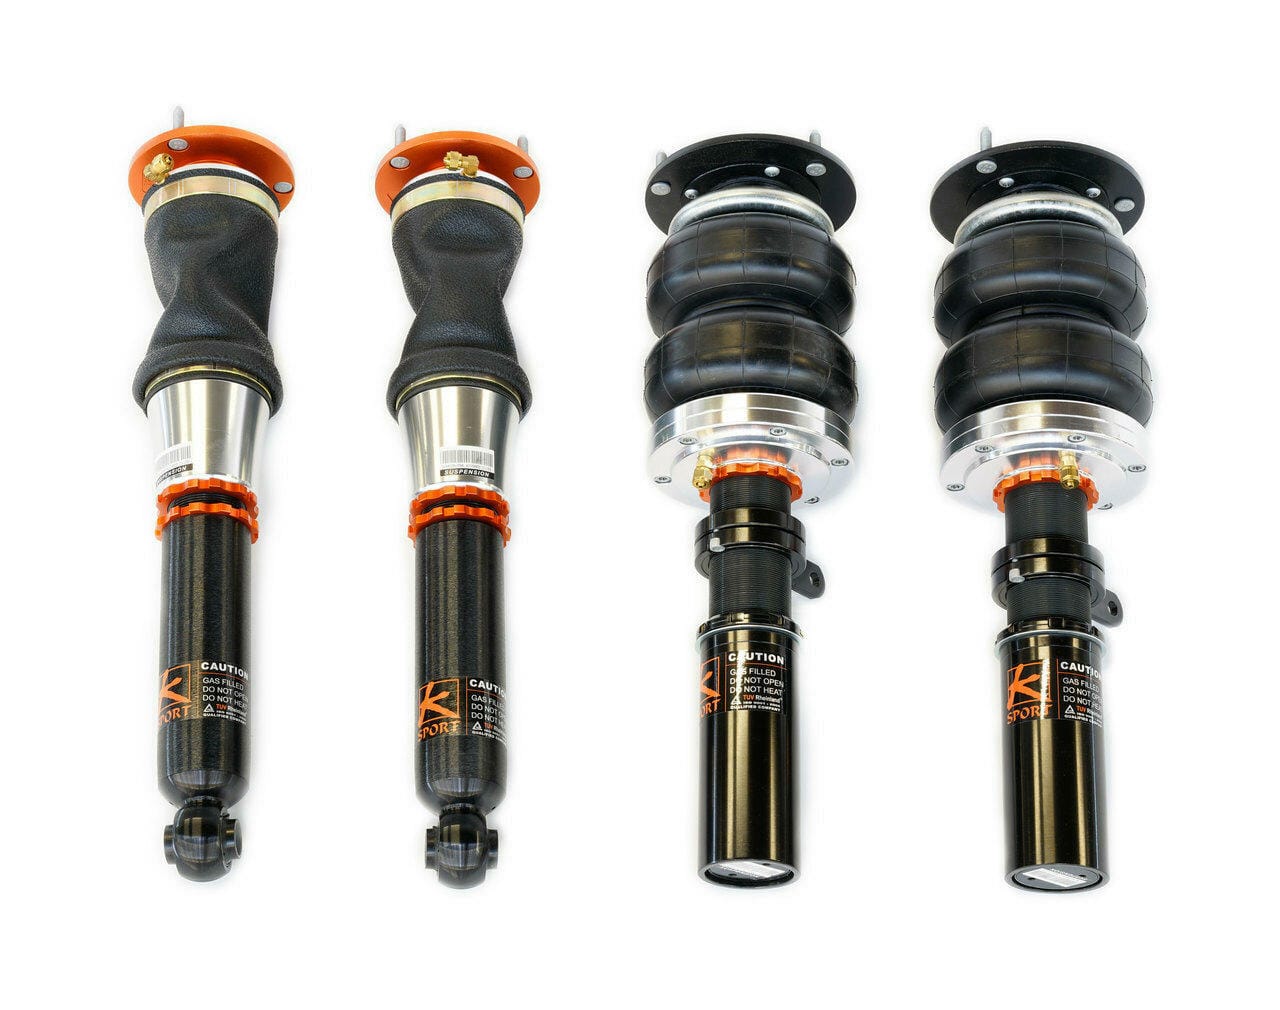 Ksport Airtech Air Suspension System Struts Only - 2017-2018 Honda Civic Si Adaptive Damper will not function CHD421-ASO-02